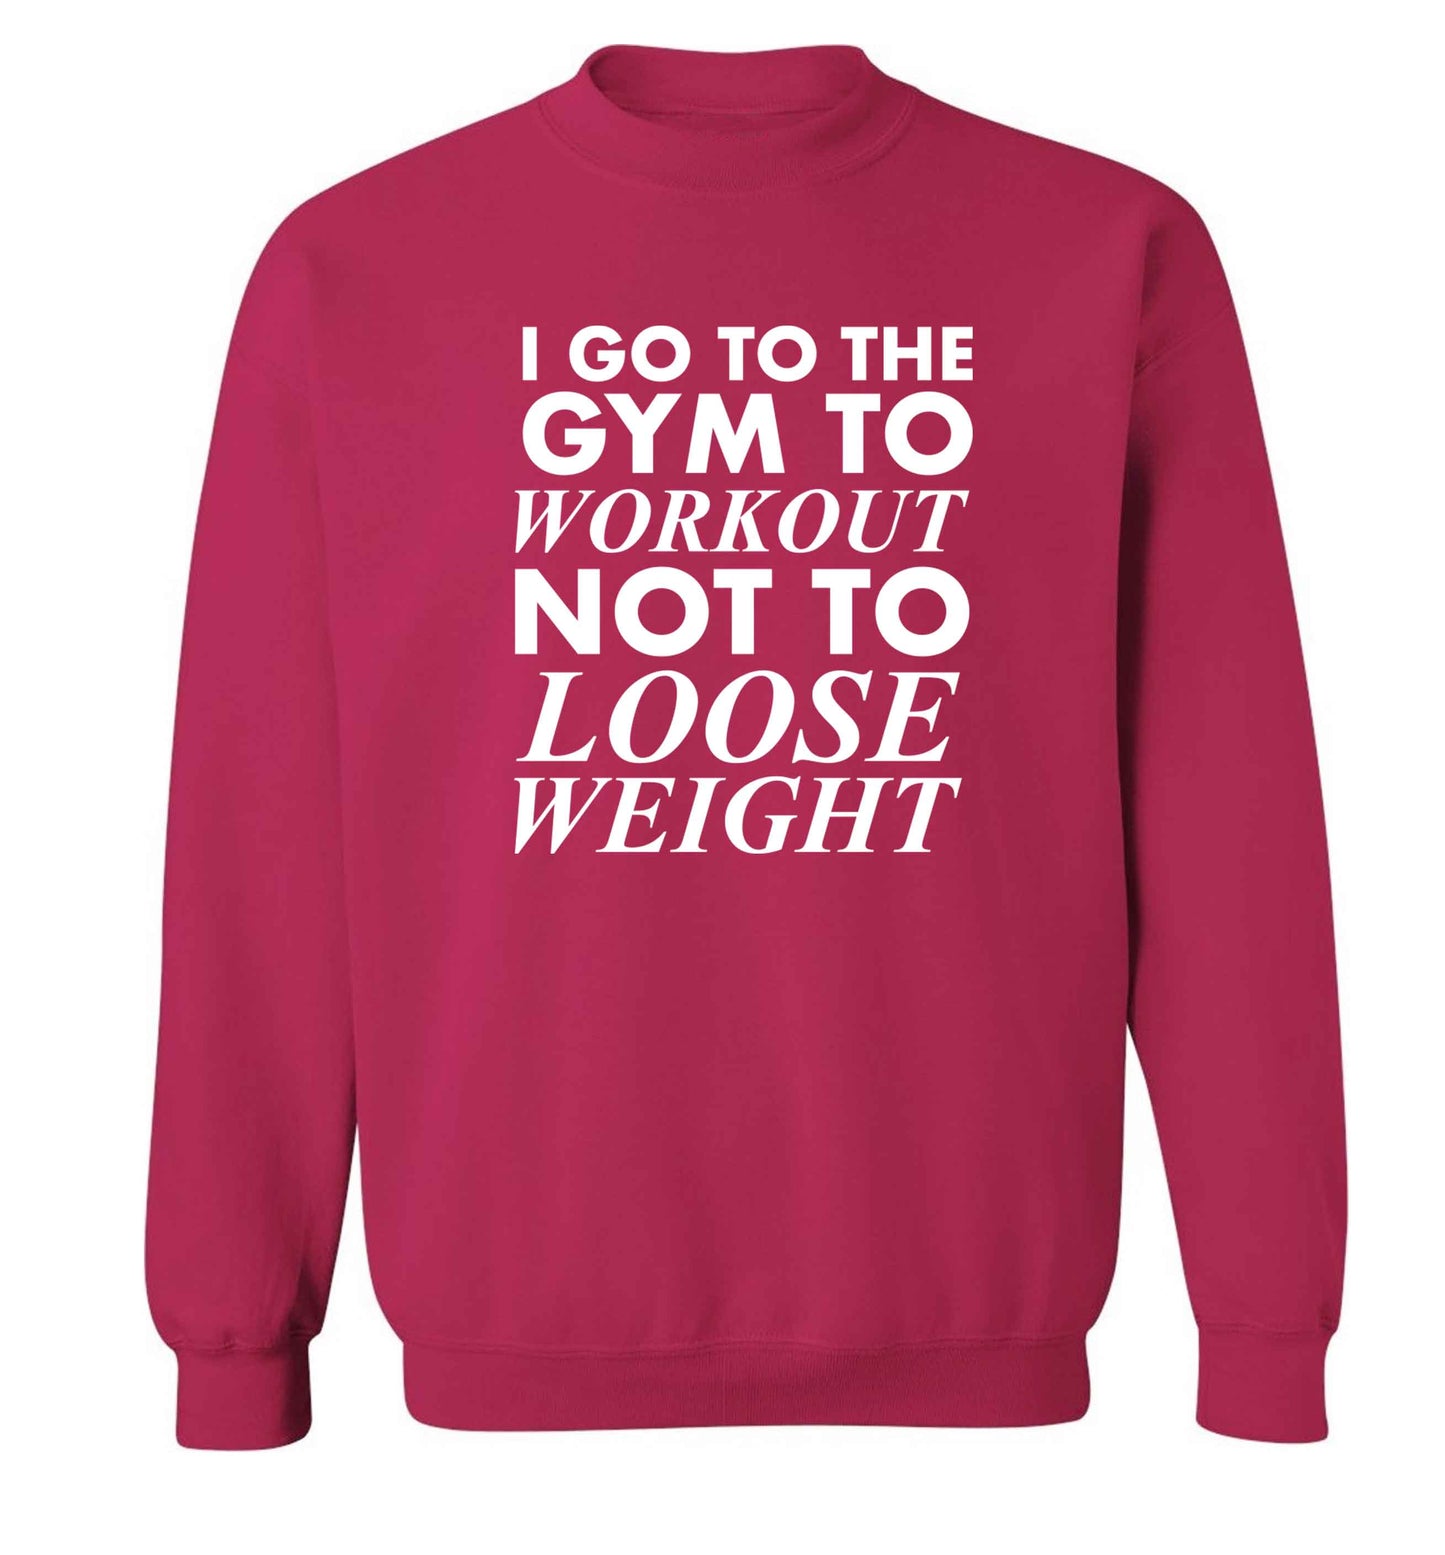 I go to the gym to workout not to loose weight adult's unisex pink sweater 2XL